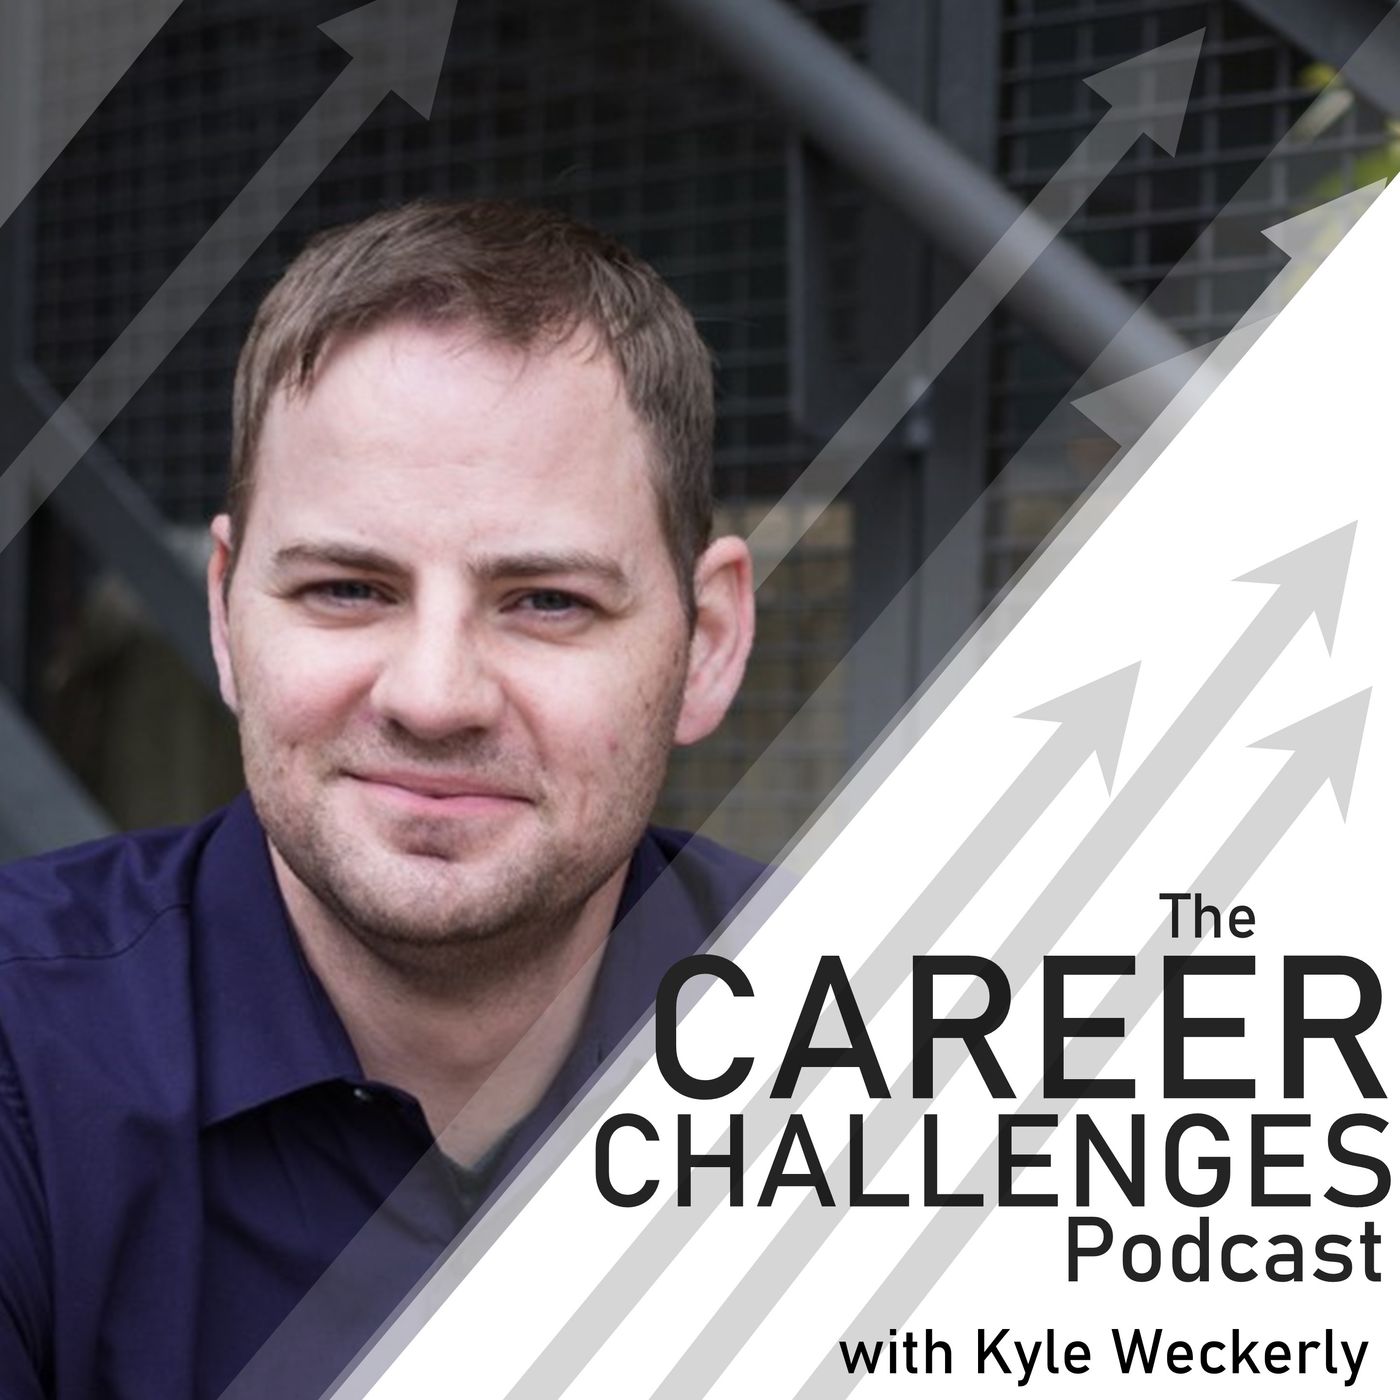 The Career Challenges Podcast